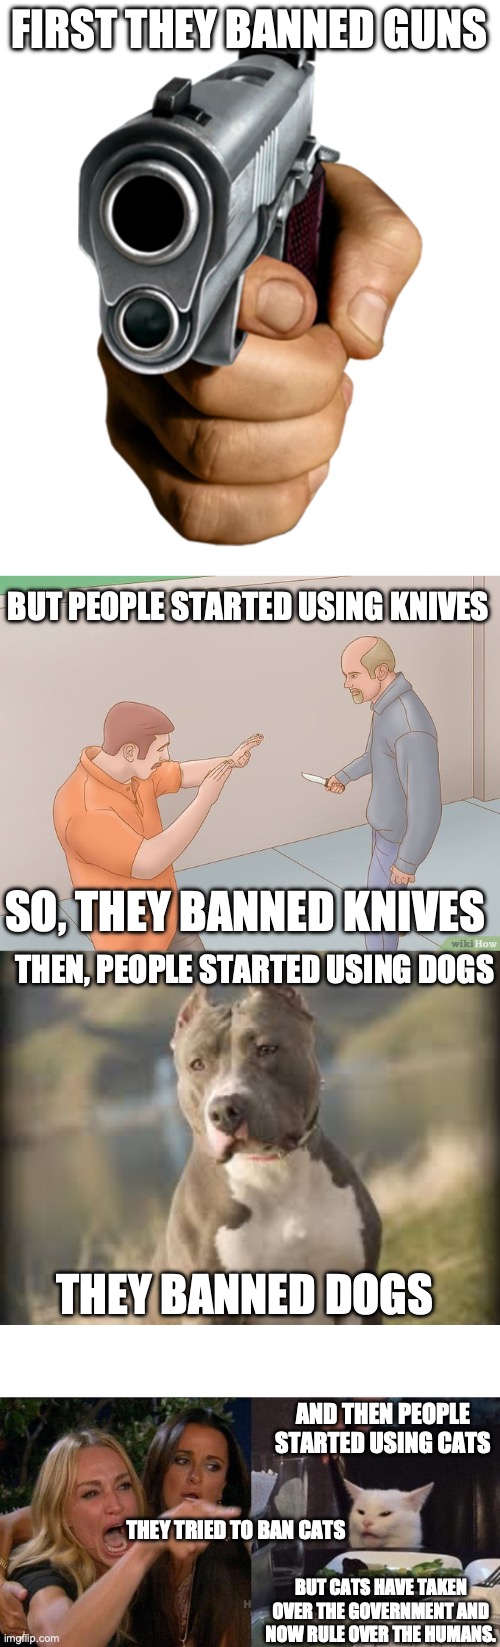 Planet of the Cats | FIRST THEY BANNED GUNS; BUT PEOPLE STARTED USING KNIVES; SO, THEY BANNED KNIVES; THEN, PEOPLE STARTED USING DOGS; THEY BANNED DOGS; AND THEN PEOPLE STARTED USING CATS; THEY TRIED TO BAN CATS; BUT CATS HAVE TAKEN OVER THE GOVERNMENT AND NOW RULE OVER THE HUMANS. | image tagged in pointing gun,crazy stabbing,pitbull dog,memes,woman yelling at cat | made w/ Imgflip meme maker